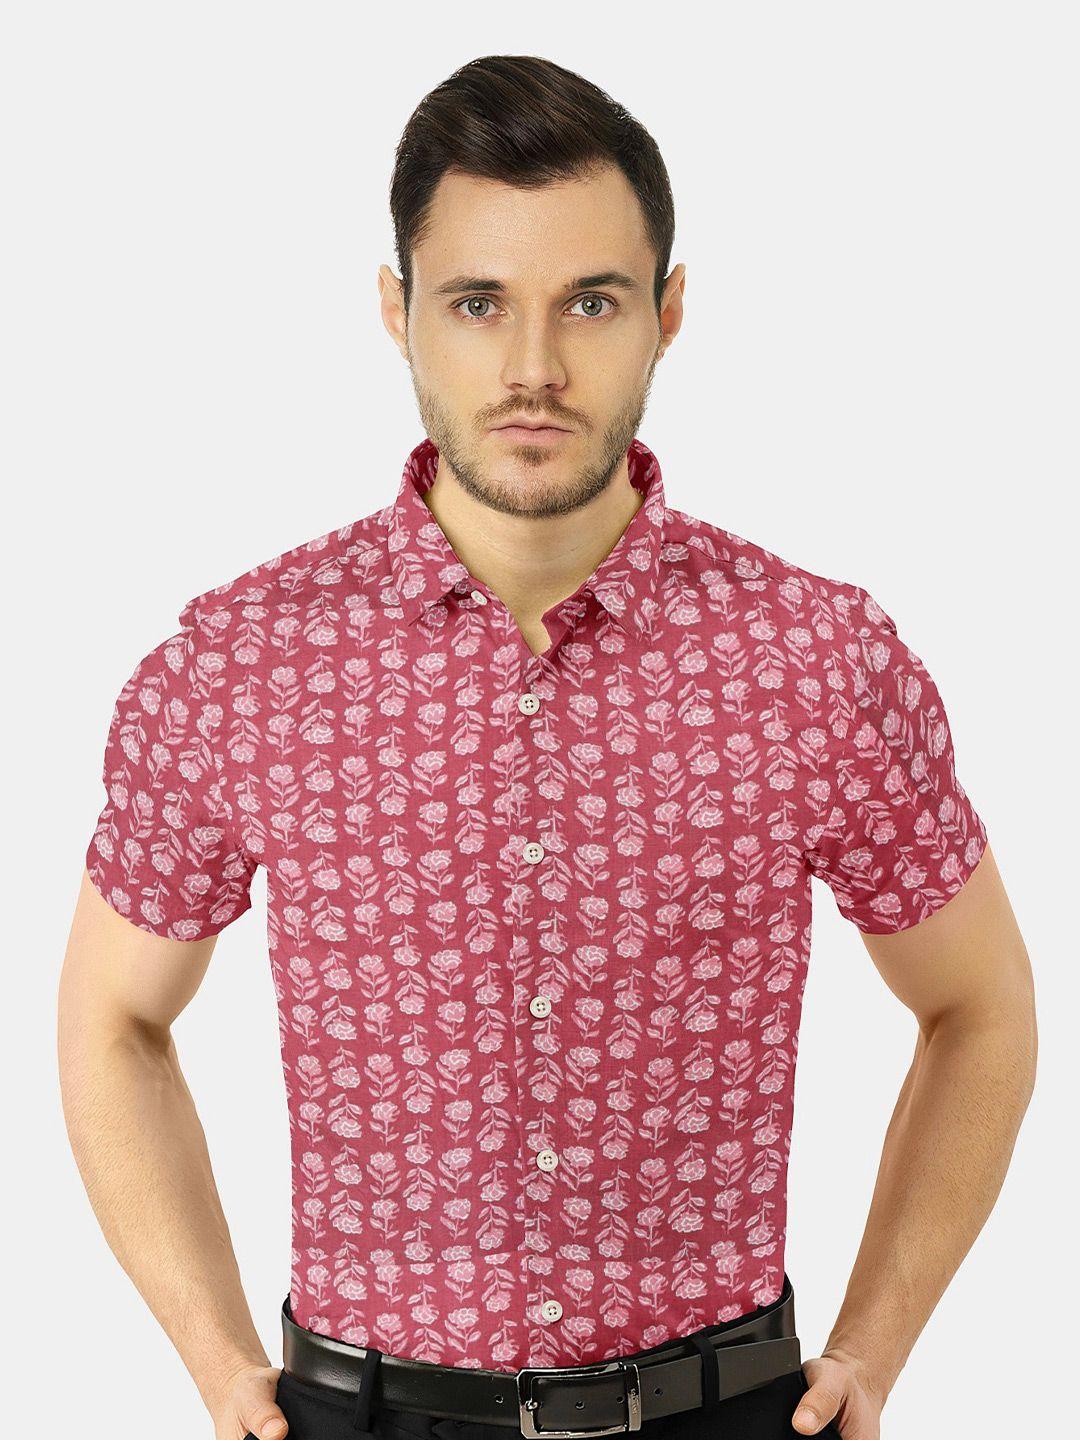 misbis relaxed slim fit floral opaque printed casual shirt